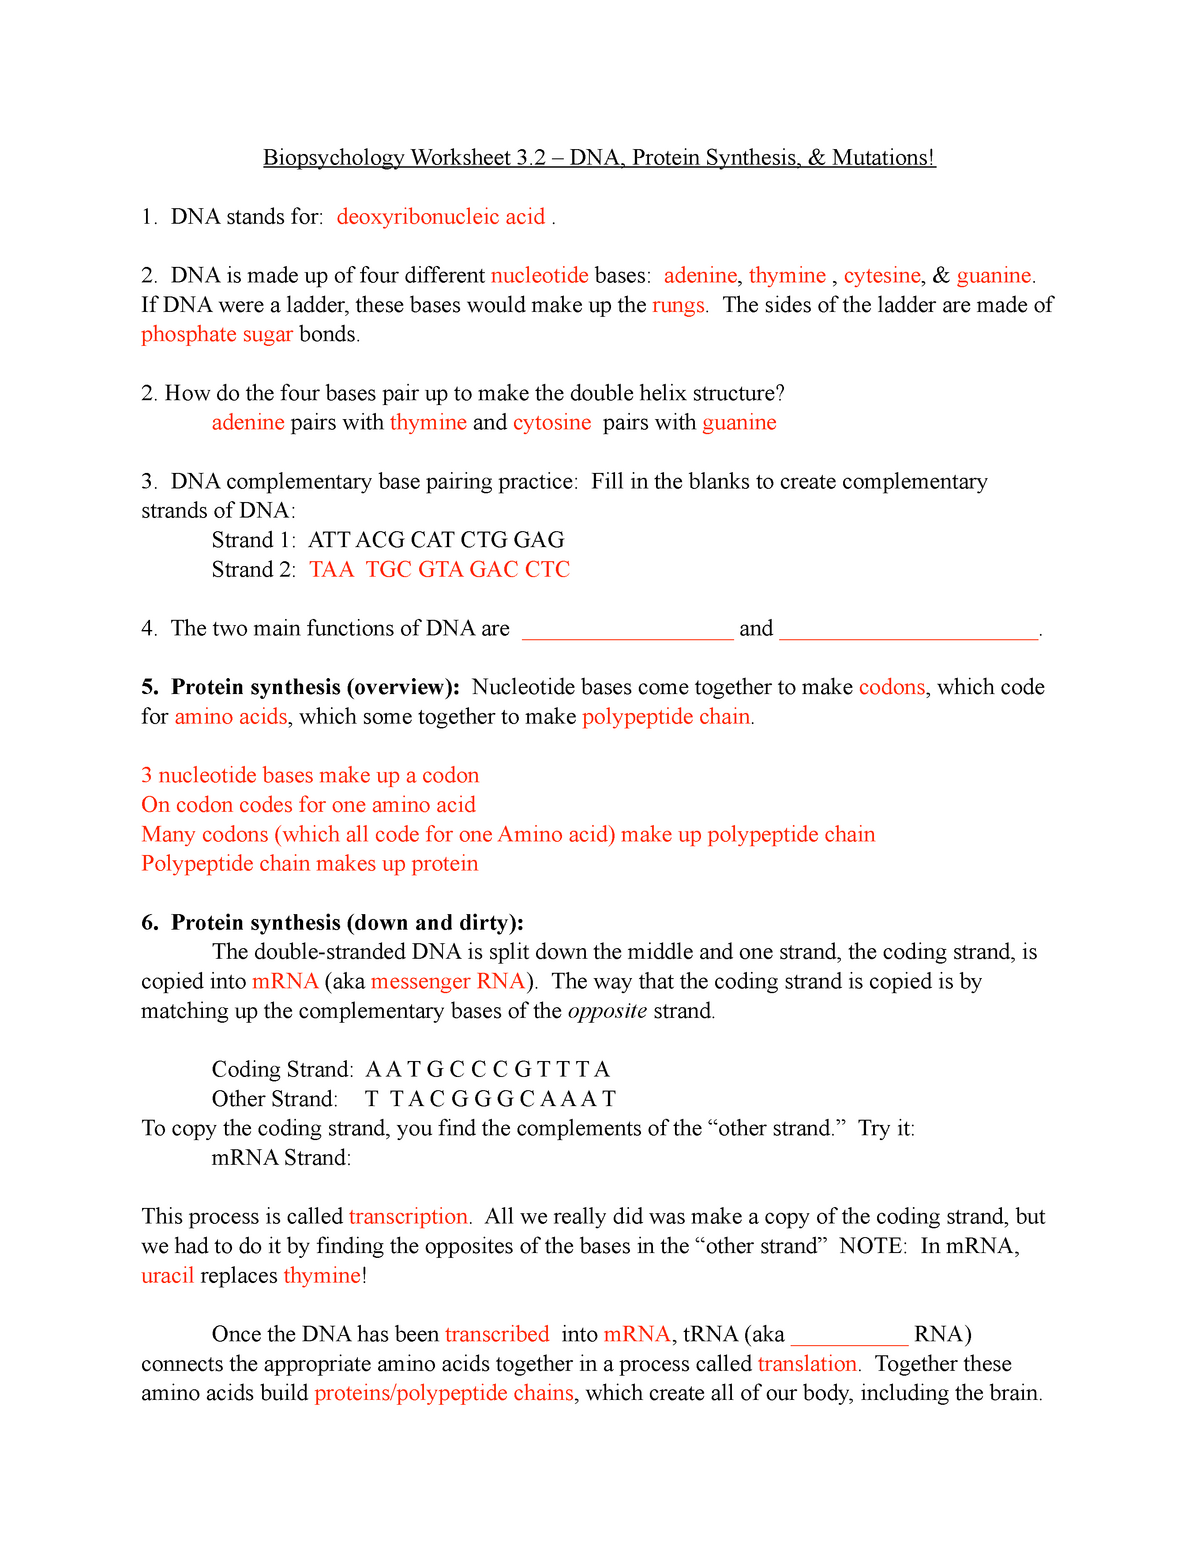 SI 211.21 DNA Protéine Synthesis Mutations - Biopsychology Worksheet Throughout Protein Synthesis Practice Worksheet